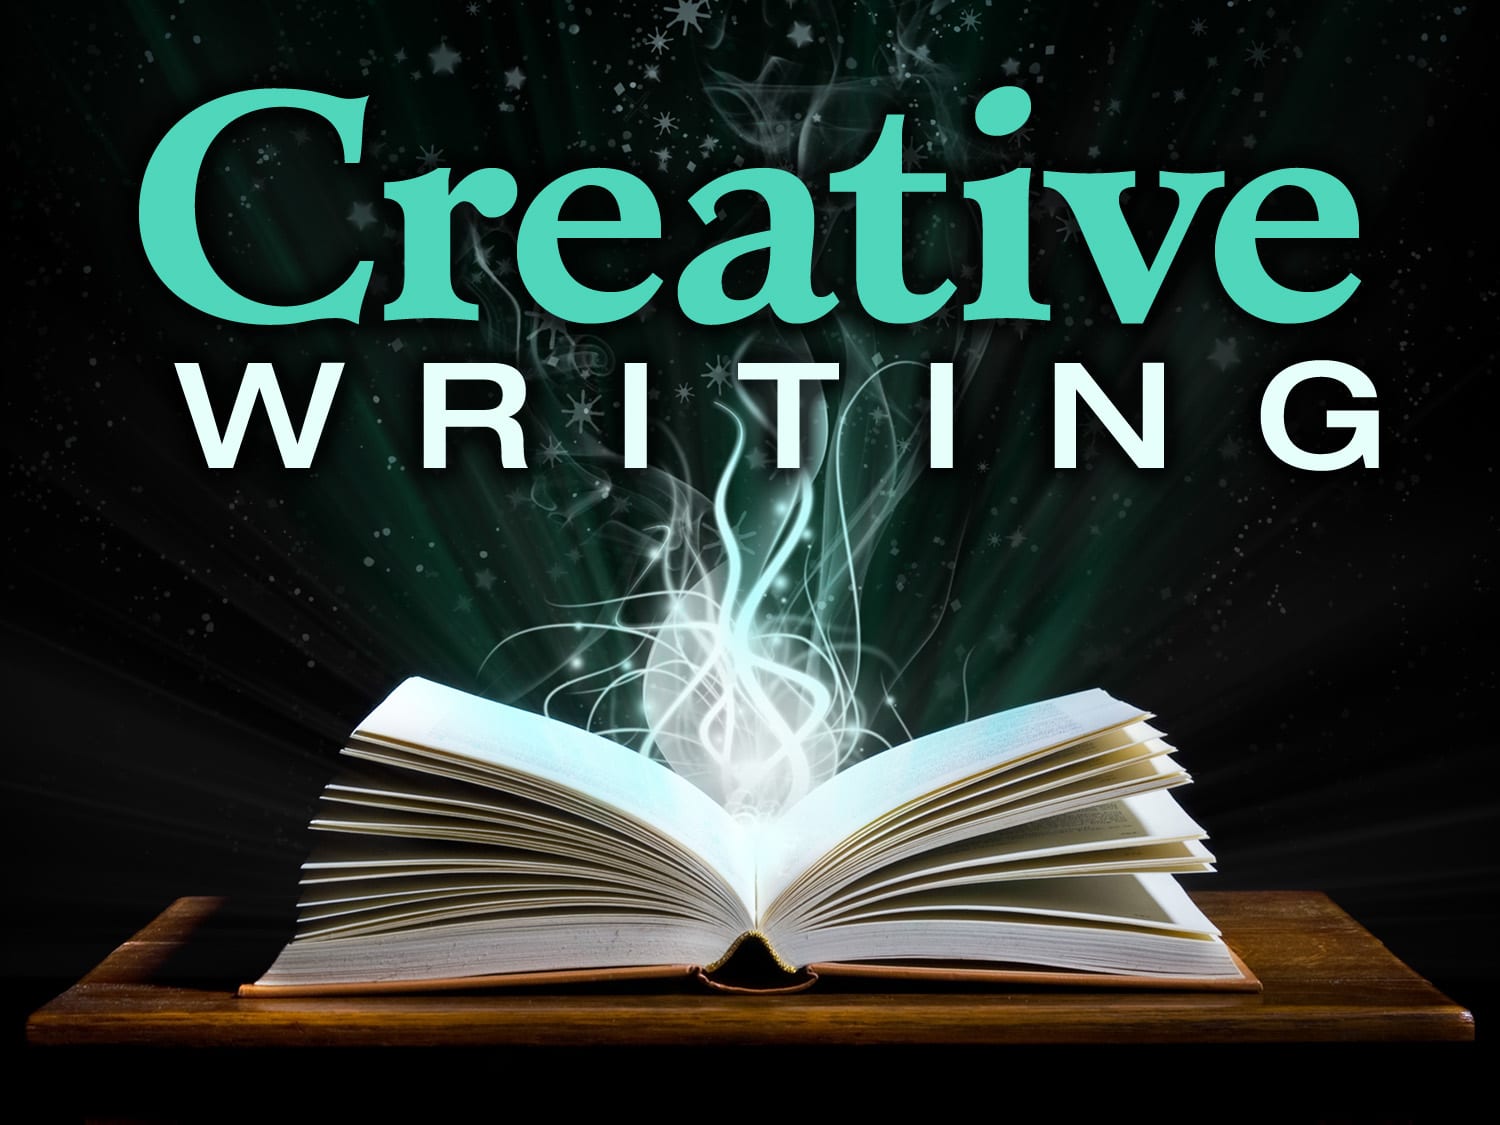 creative writing club images